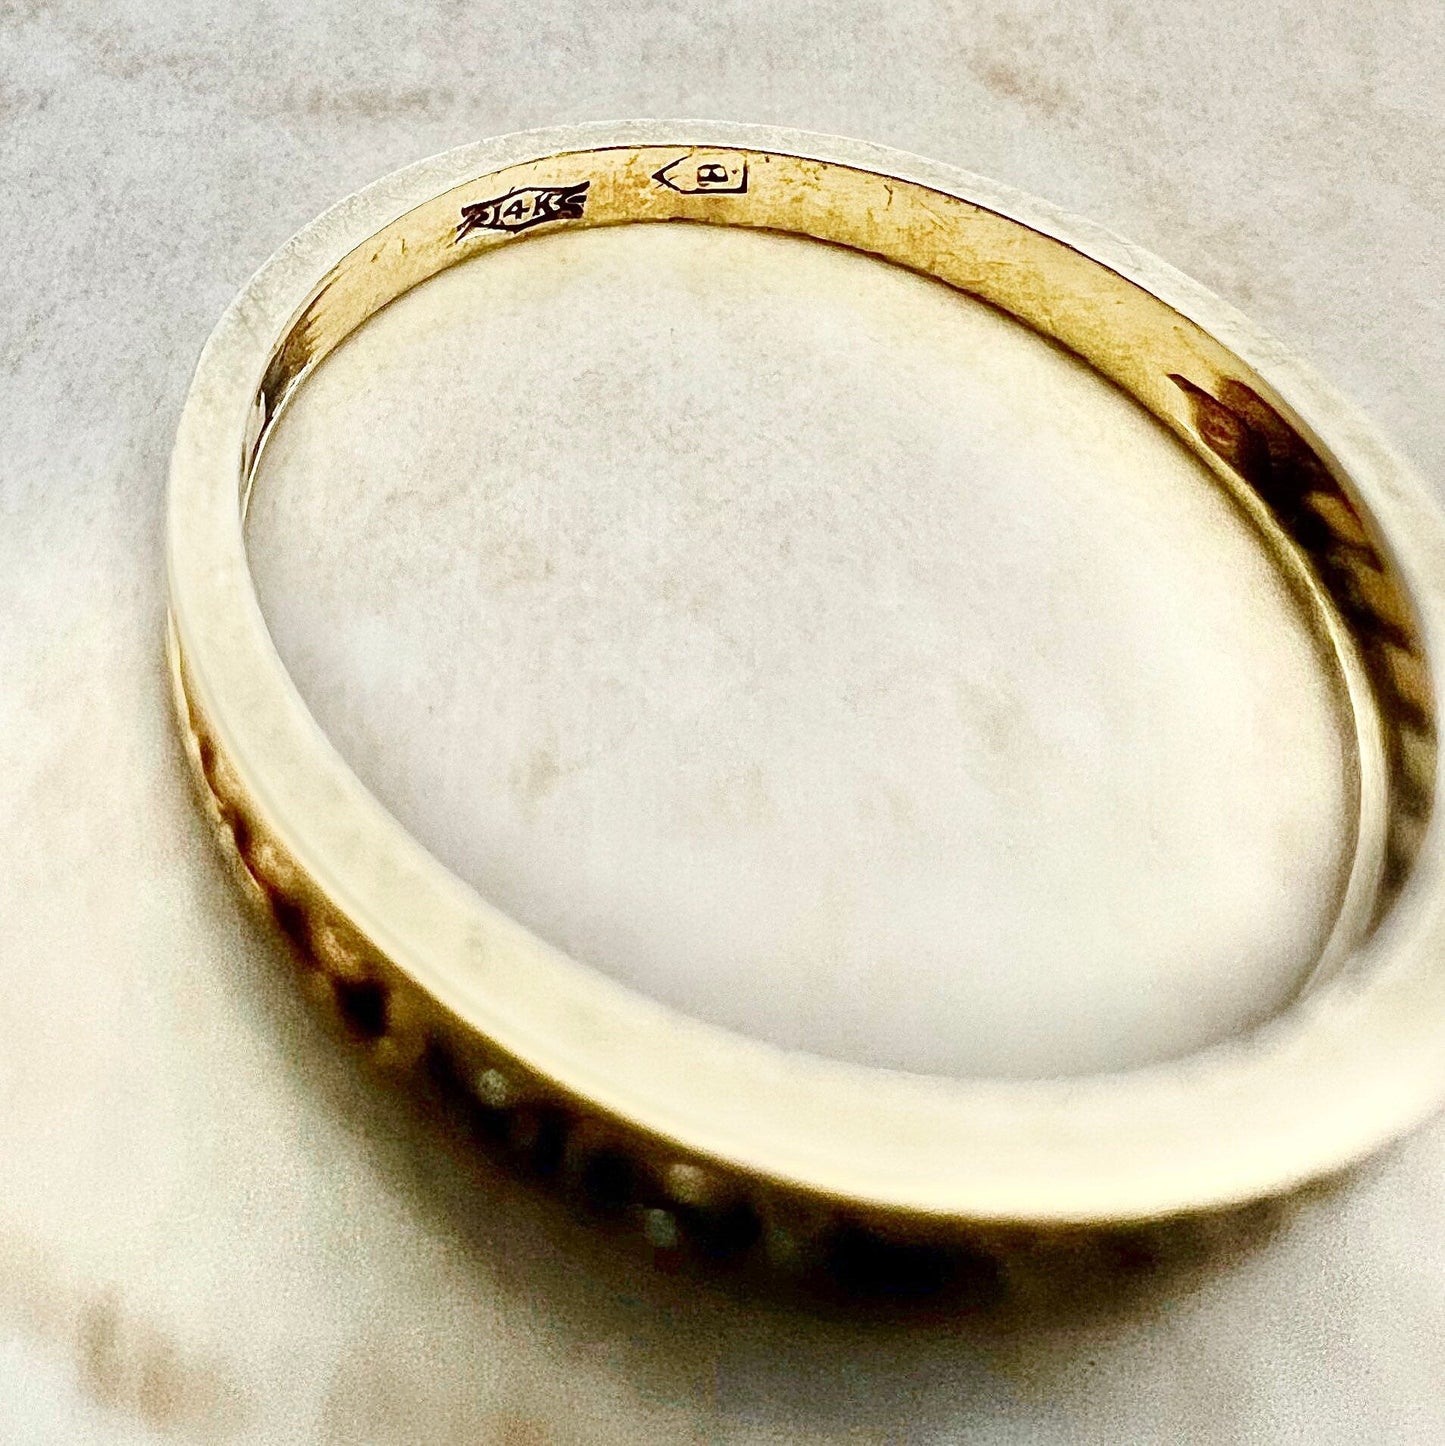 14K Vintage Diamond Band Ring - 2 Tone Gold Band - 5 Stone Yellow Gold Wedding Ring - Rope Design - Anniversary Ring - Valentine’s Day Gift